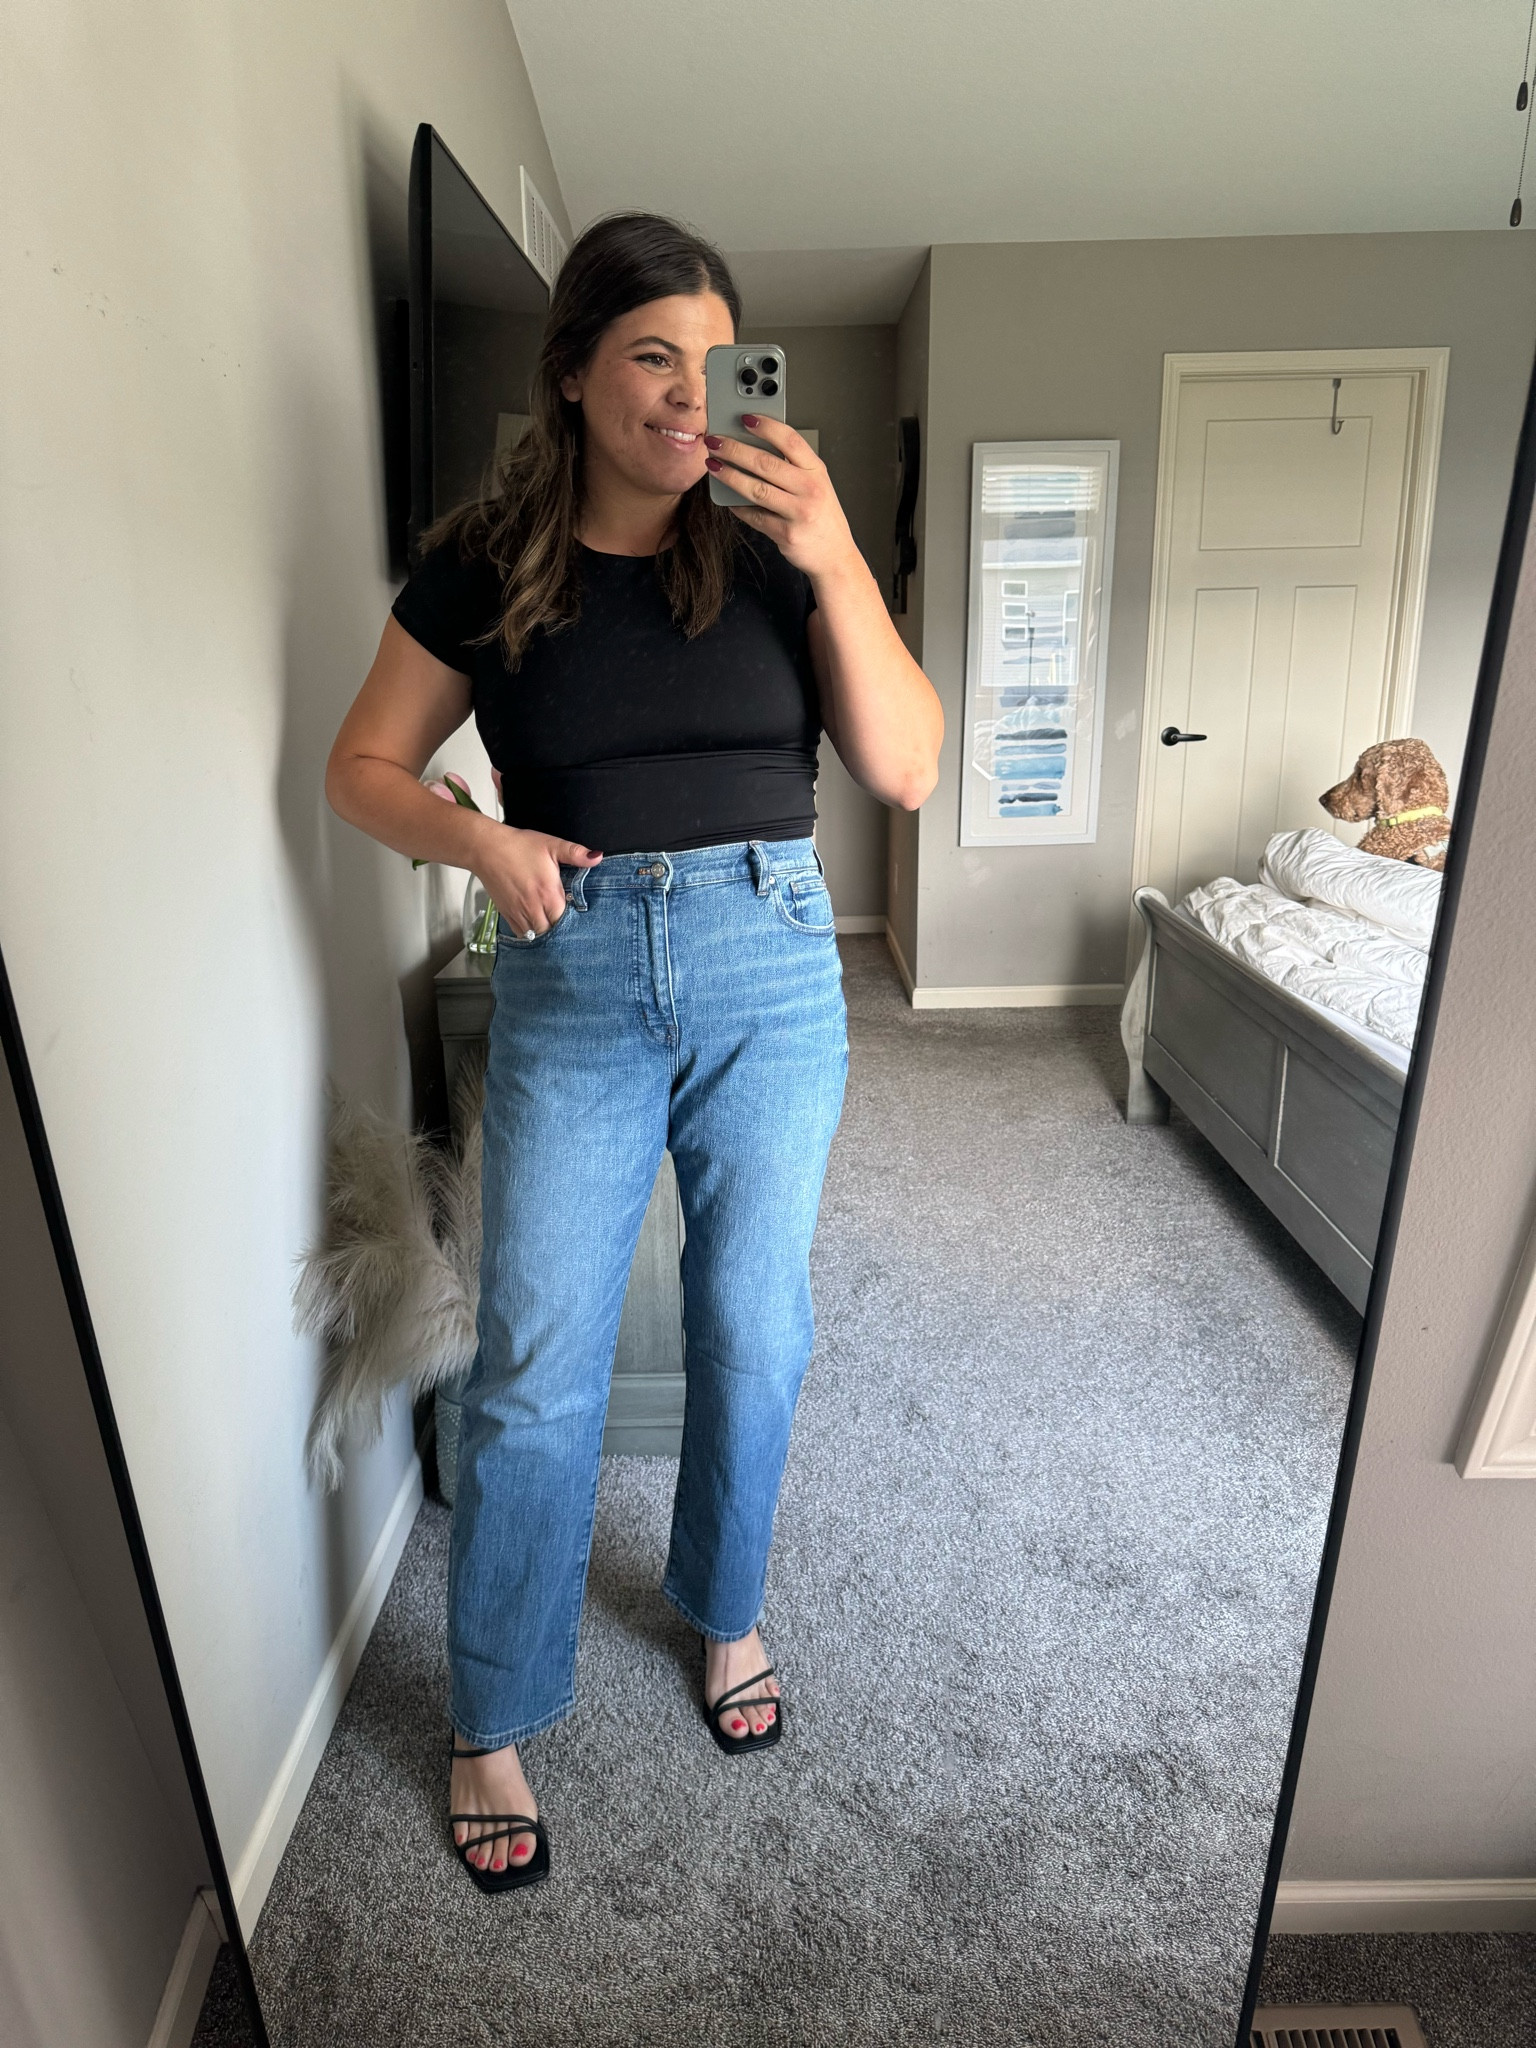 mom jeans and heels  Casual fall outfits, Fashion, Millennials